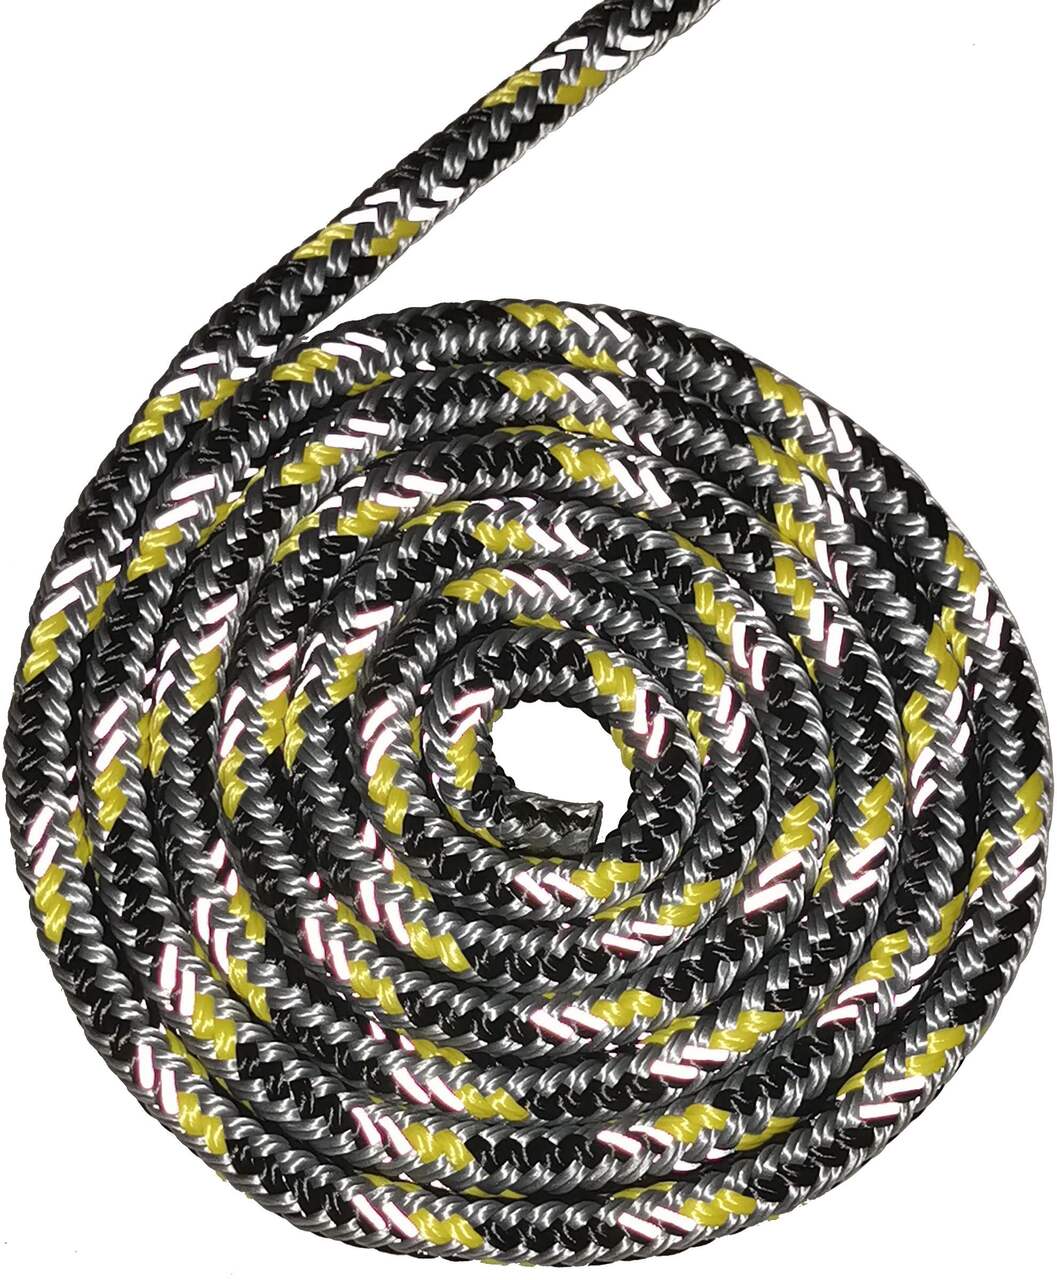 Blueline Reflective Boating Utility Rope, 1/2-in x 50-ft